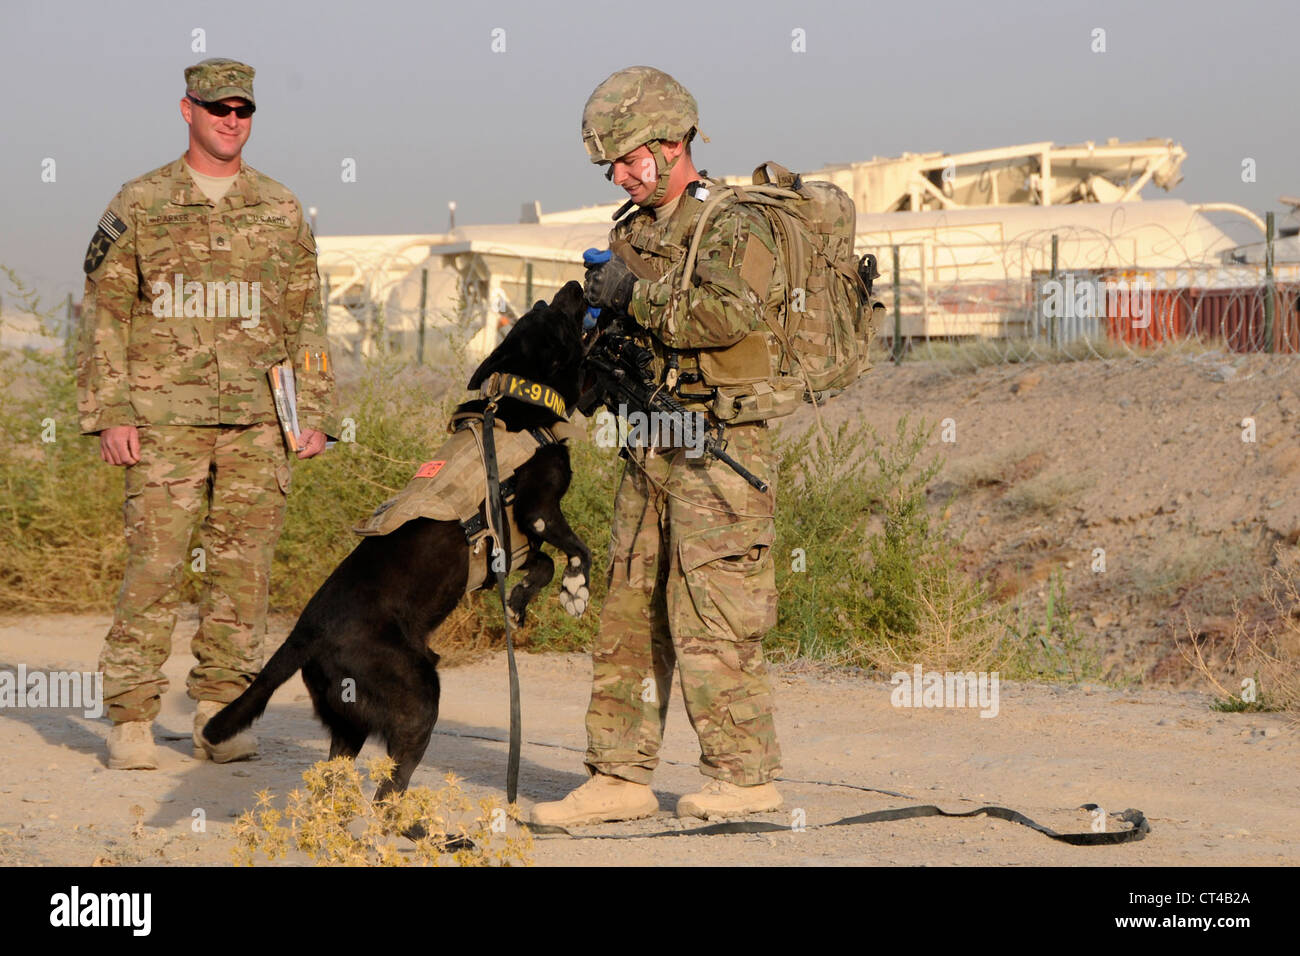 U.S. Air Force Staff Sgt. Larry Harris, a Military Working Dog handler, rewards his dog, Aaron, for finding simulated explosives buried along a road at Kandahar Airfield, Afghanistan on July 9, 2012 during a training exercise while U.S. Army Staff Sgt. Joshua Parker looks on. The handlers and their dogs rotate through Kandahar Airfield for validation prior to moving out to Forward Operating Bases around the country where they will lead combat foot patrols and sniff out IEDs and other explosives. Stock Photo